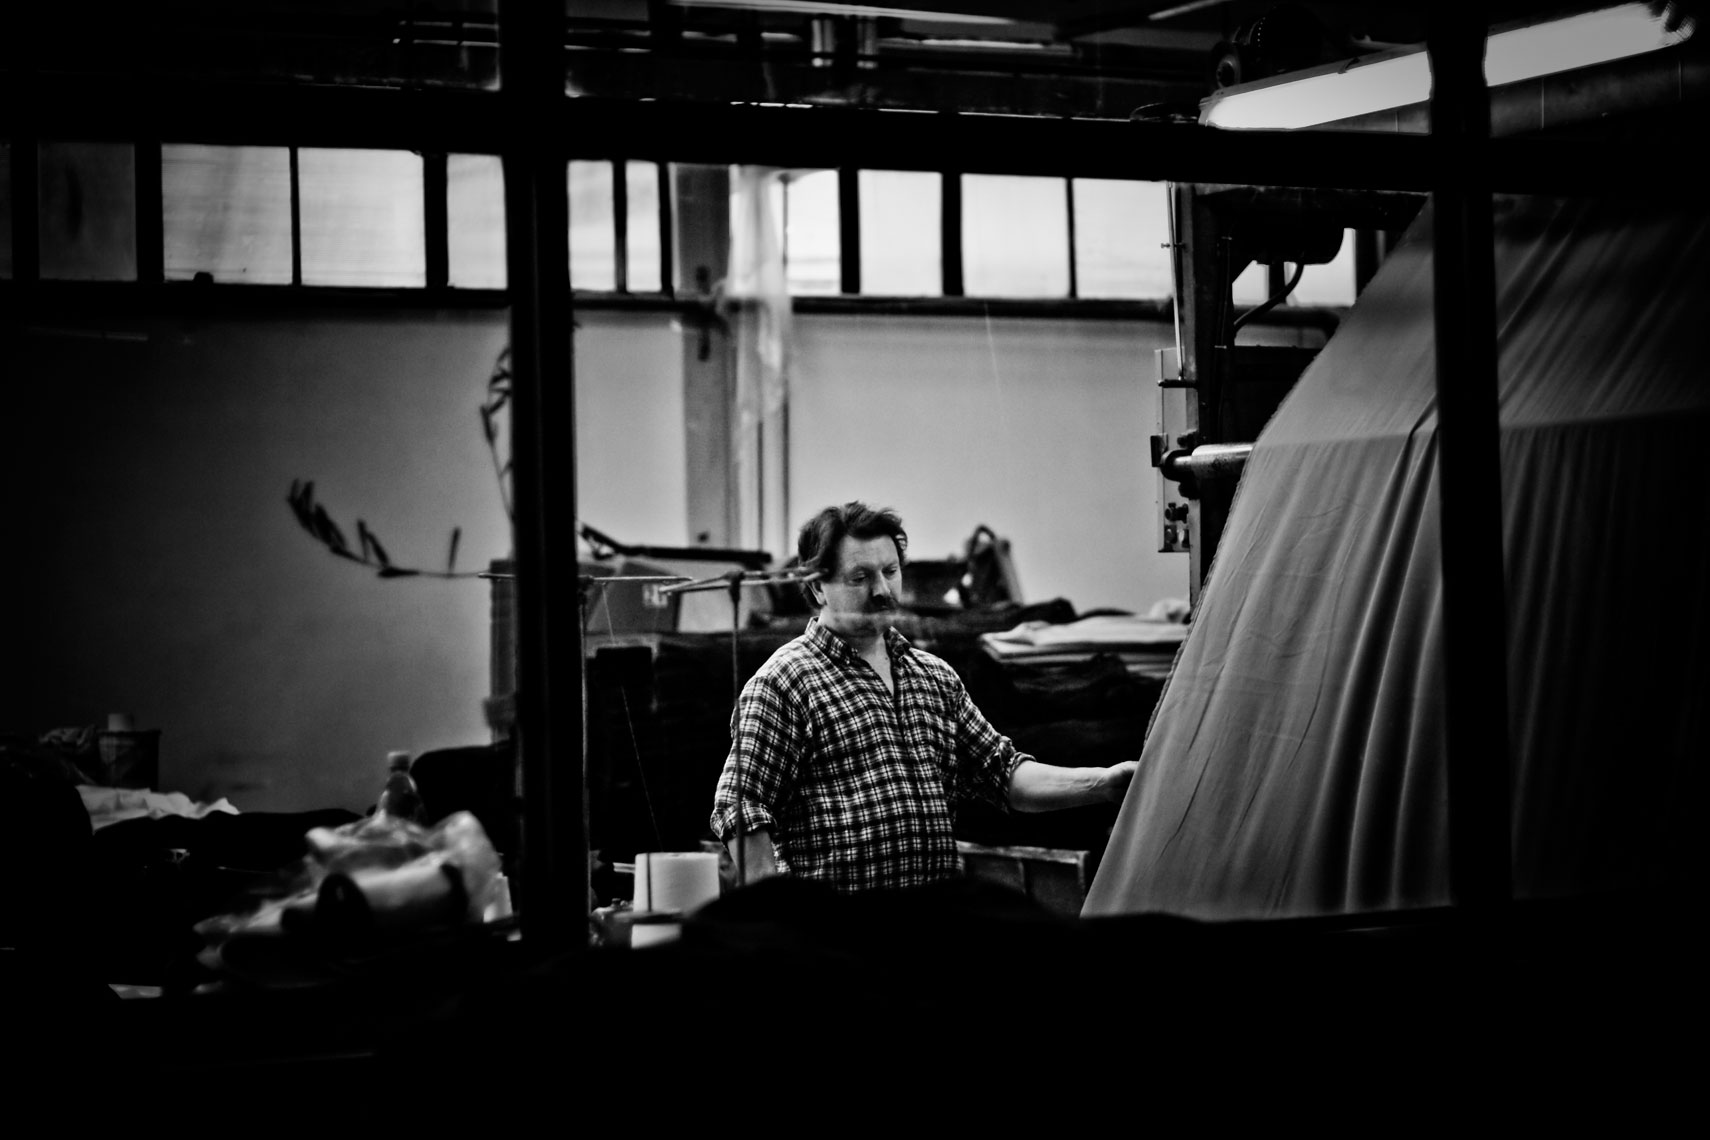 ITALY. Prato, 31st March 2009. Worker using finishing machines.